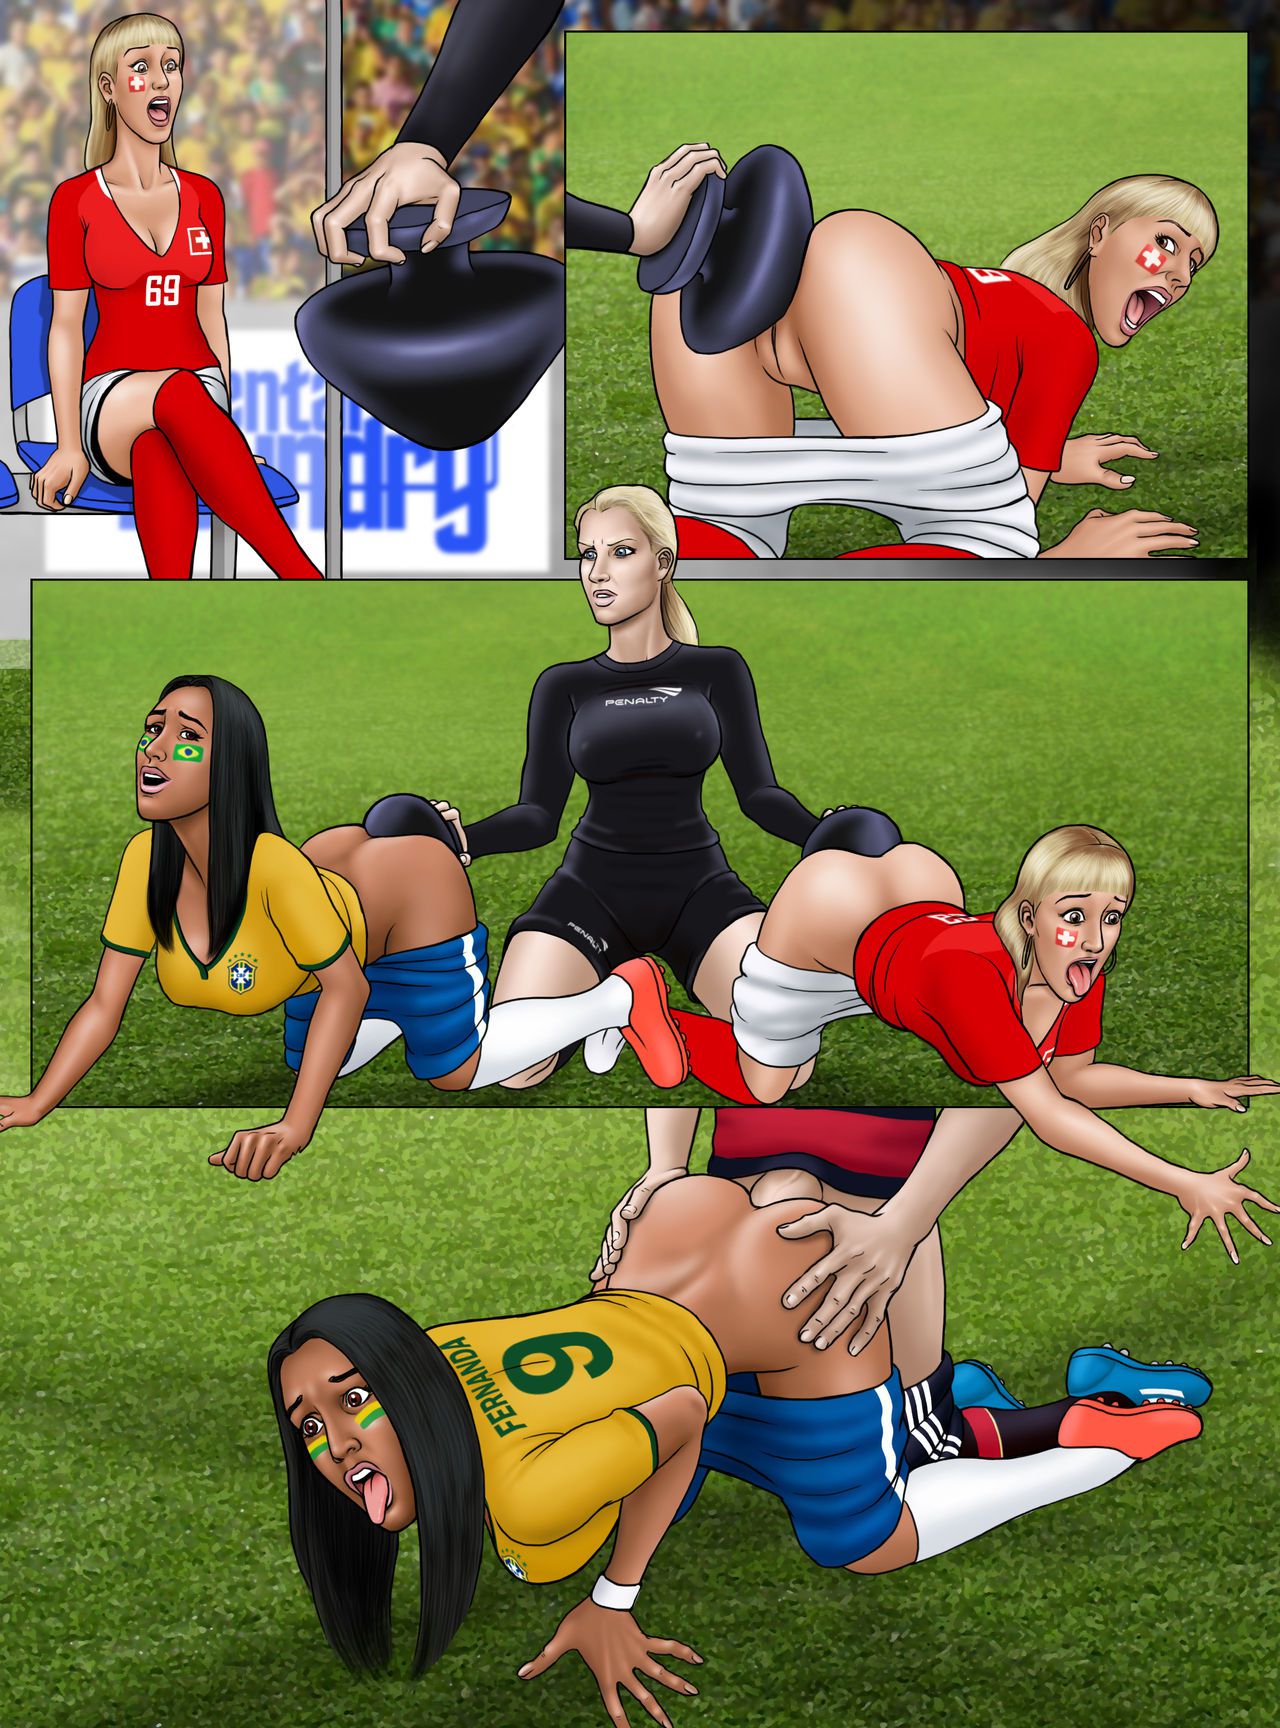 [Extro] FIFA World Cup Russia 2018 - Soccer Hentai - Women's World Cup France 2019 (Ongoing) [Korean] 21